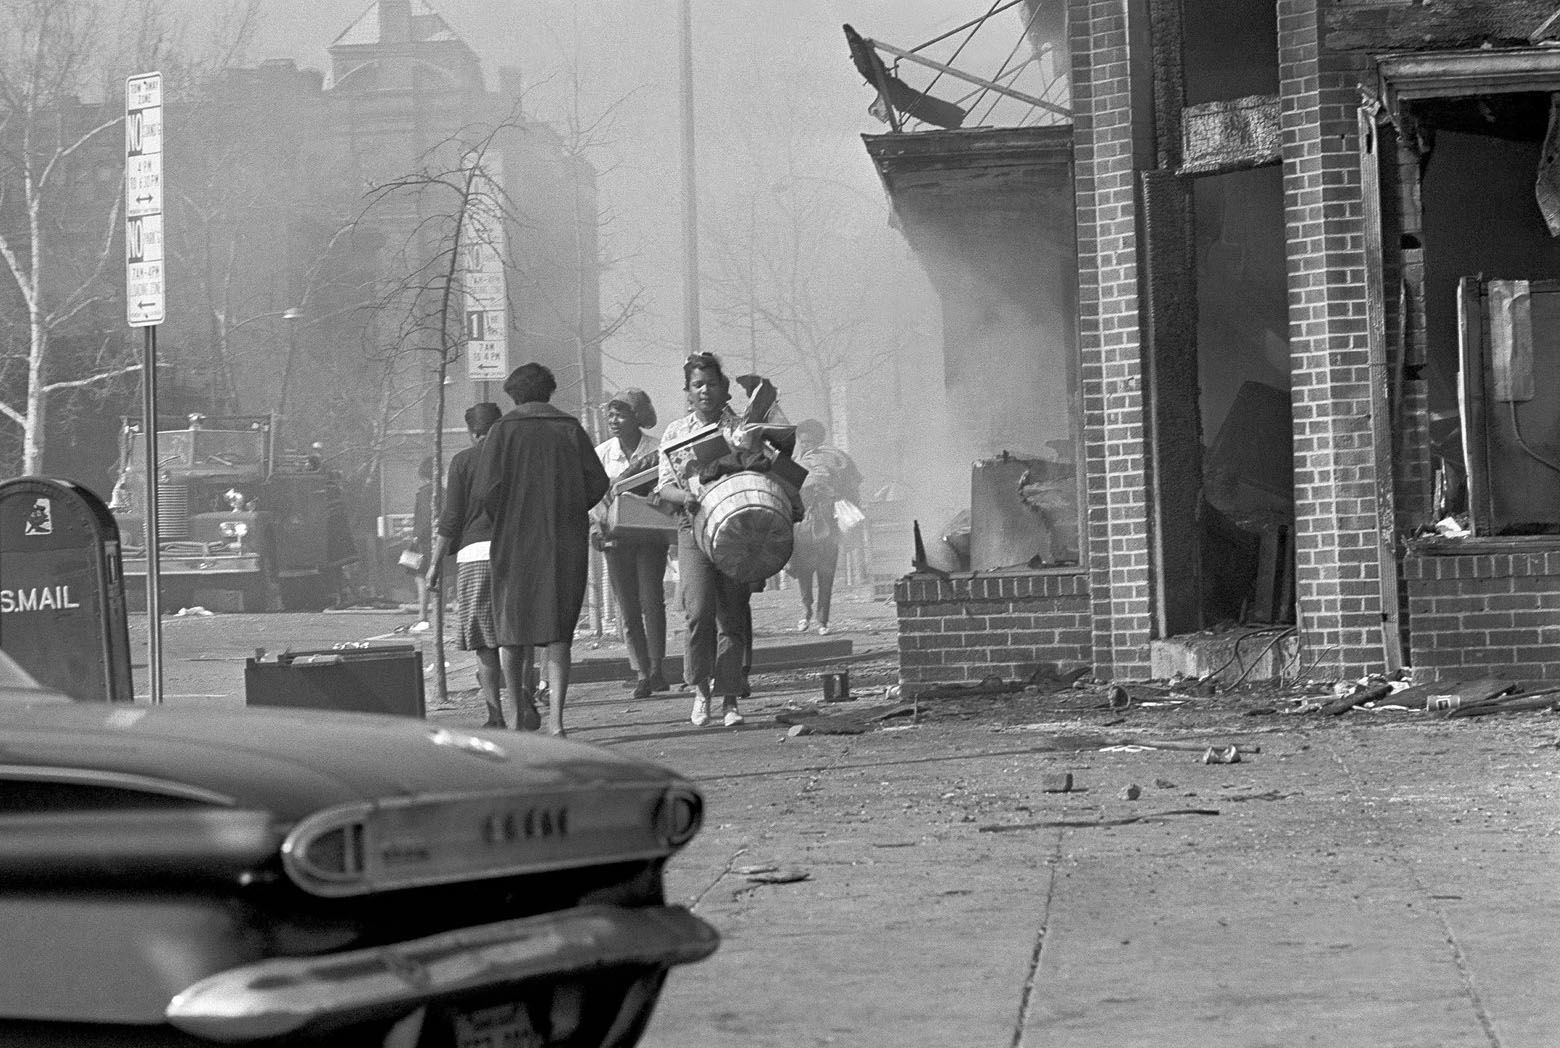 Women carry armloads of clothing and other articles as they walk past a northwest Washington area at 7th and U Streets, April 5, 1968. The area, still dimmed by smoke from burning buildings, was one of the hardest hit as looting and arson flared in the nation’s capital. (AP Photo/Bob Schutz)